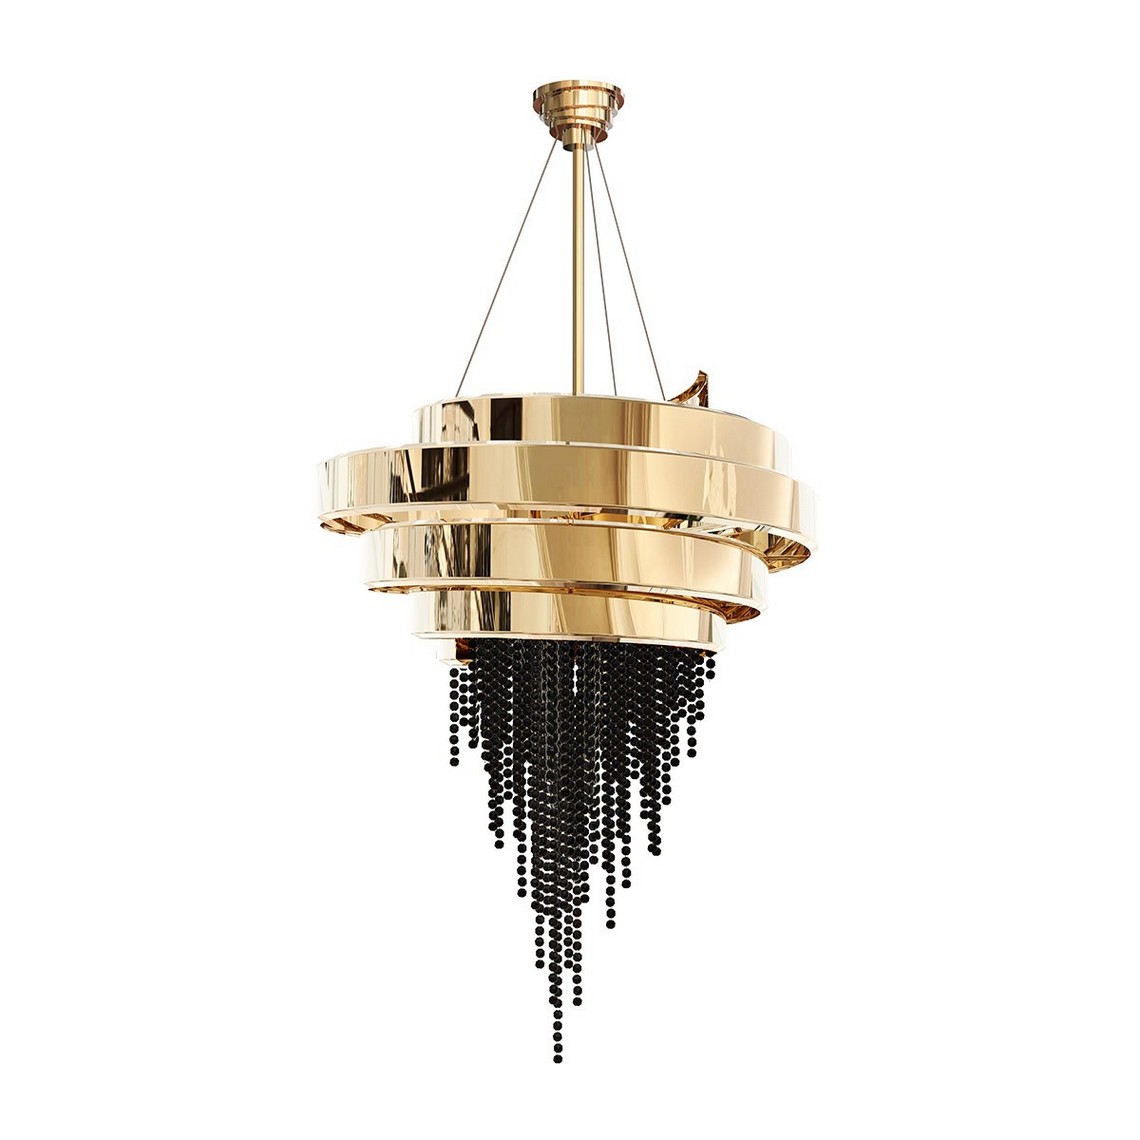 7 Luxury Chandeliers You Will Love